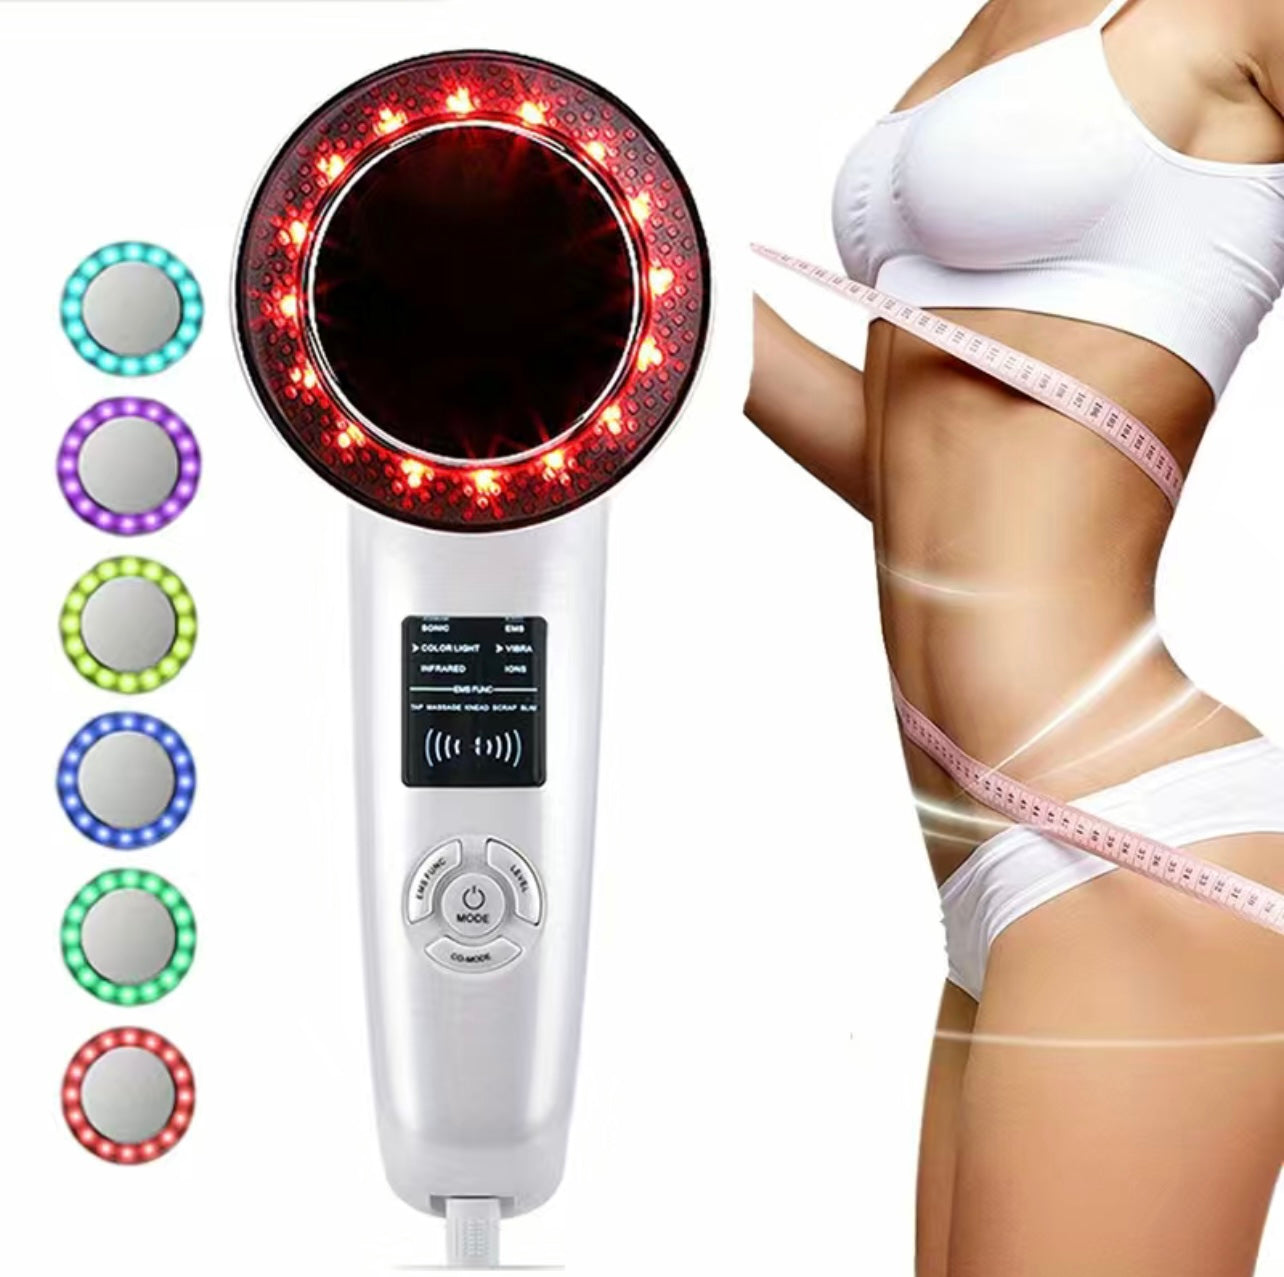 Radio Frequency, Electronic Muscle Stimulation & Infrared Light Therapy to prompt lymphatic drainage, tighten skin, produce targeted fat loss, and body contouring effects.  Can be used on the face for lifting or body for overall skin tightening.  Helps body produce new collagen and elastin which works to correct acne,dark spots and scars, TikTok top selling, viral TikTok finds, tiktok made me buy it